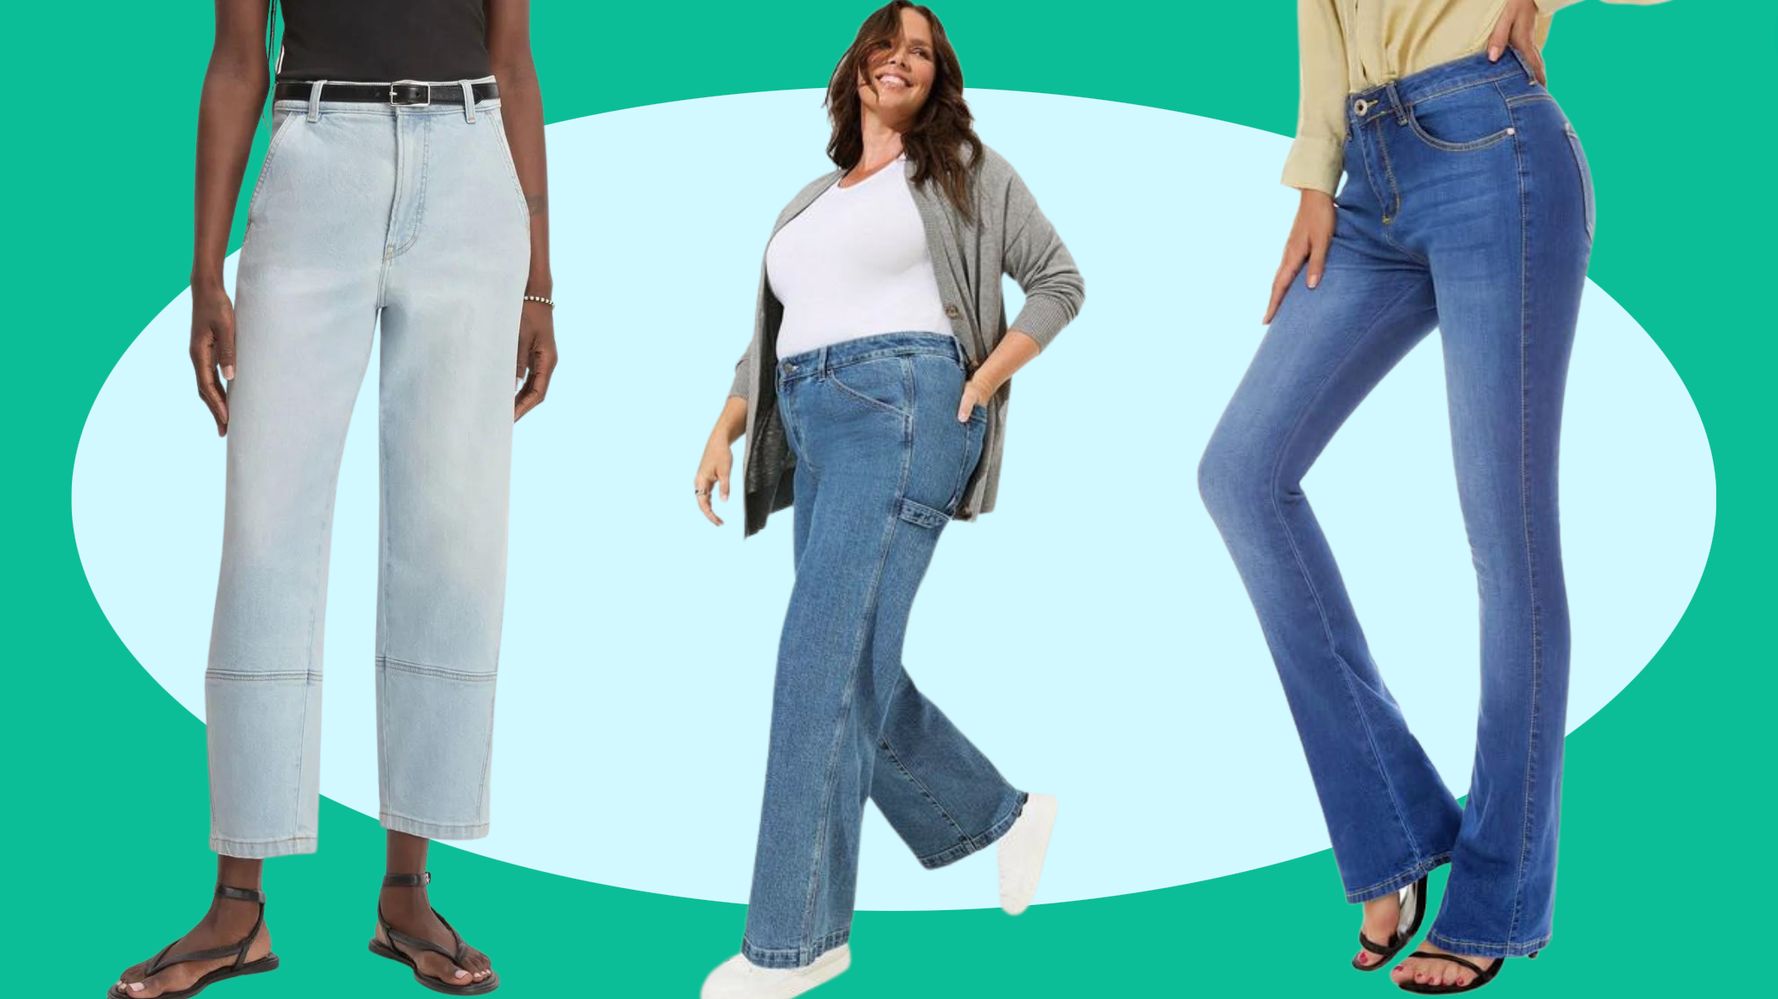 Finding The Perfect Pair Of Jeans Is Hard, So Check Out These 28 Options  That Reviewers Seriously Swear By